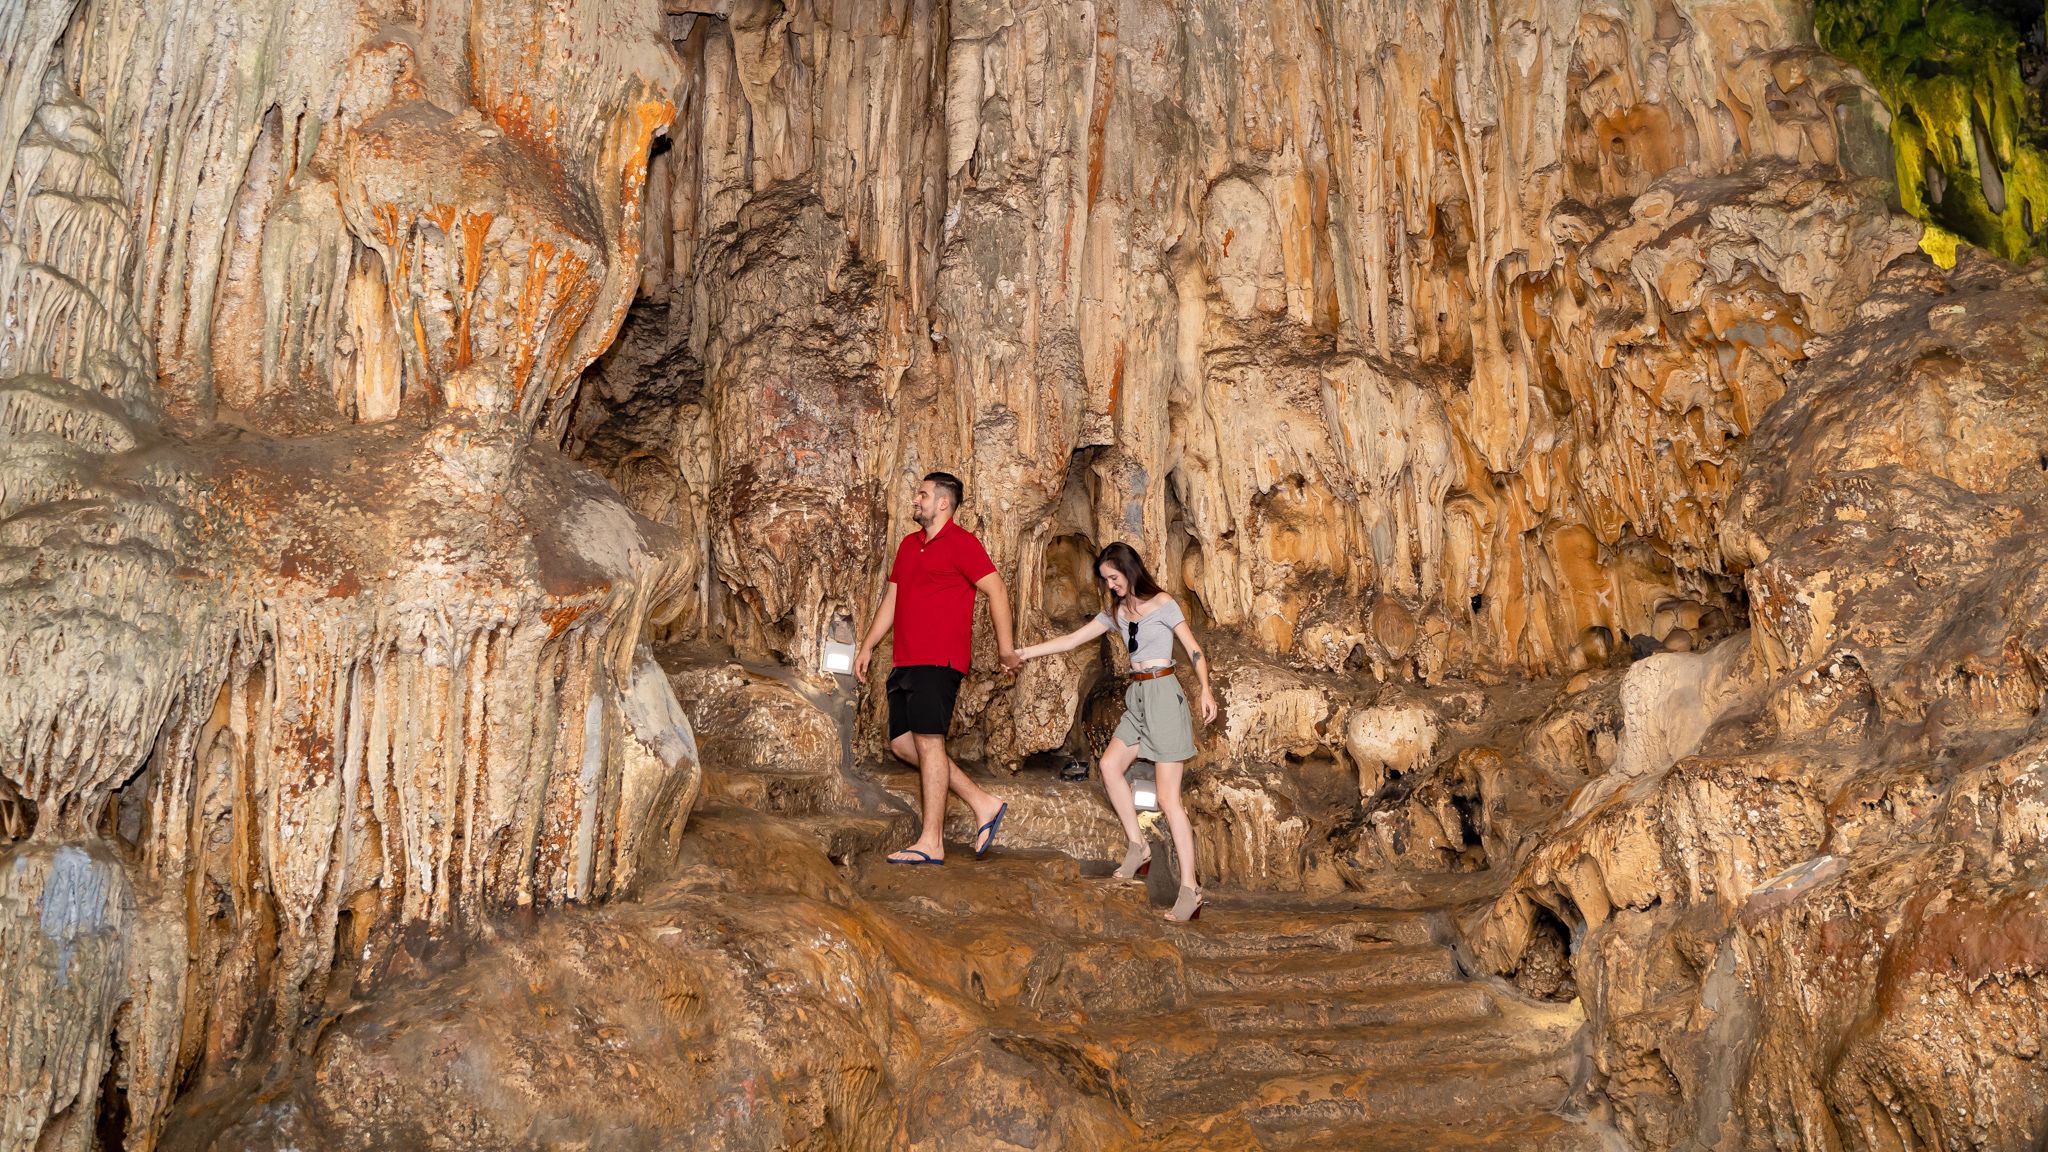 Day 2 Discover The Majestic Cave System Of Halong Bay